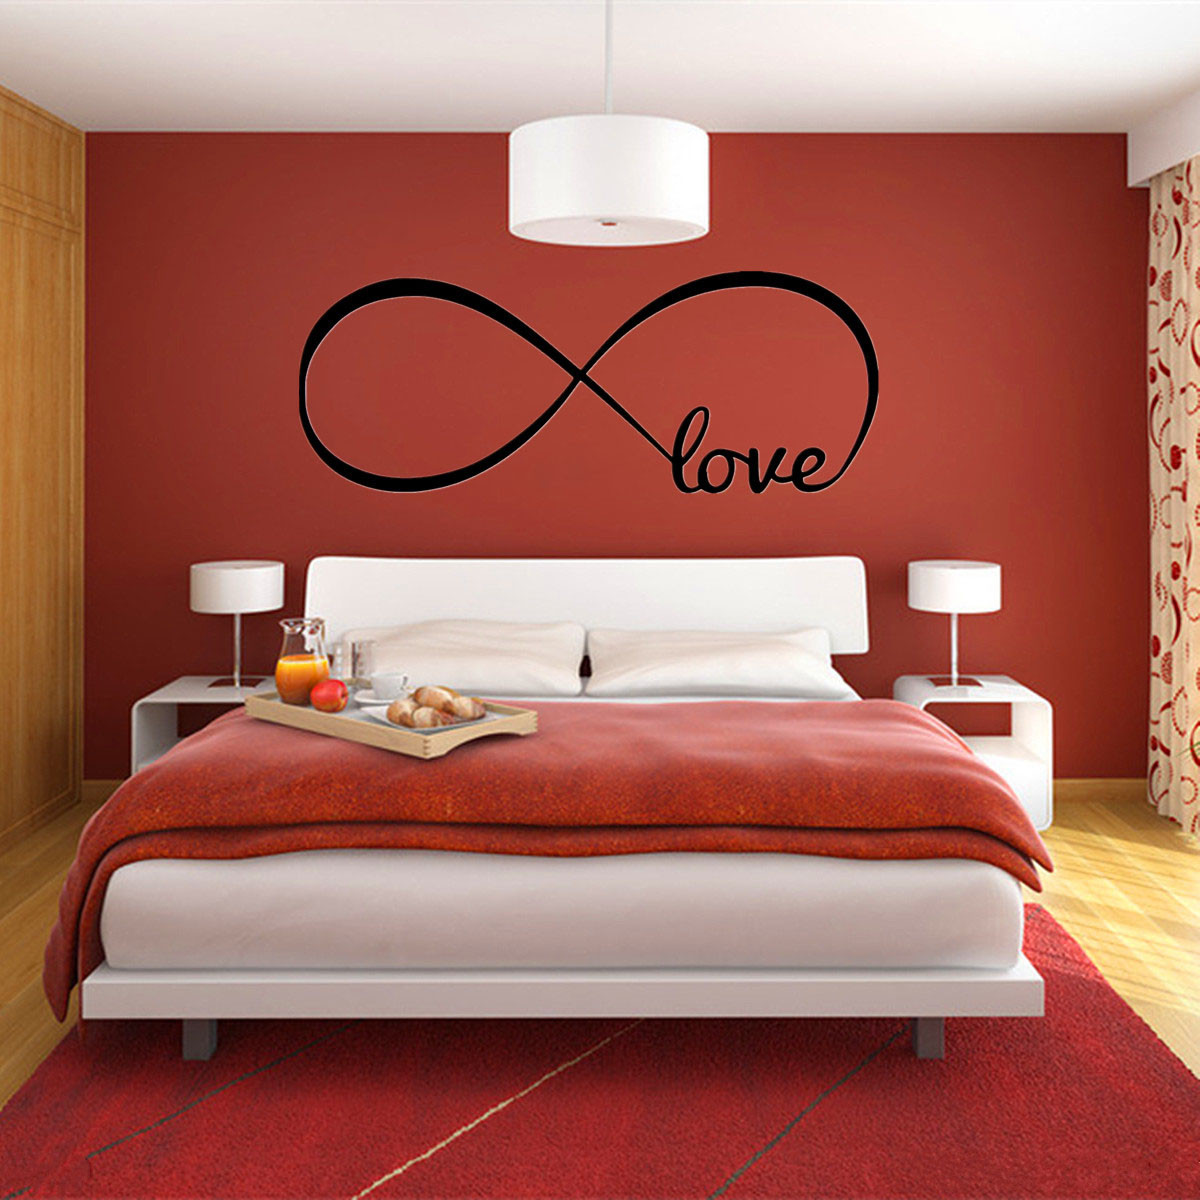 Cool Wall Art For Bedroom
 Cool Love Removable Wall Stickers Art Vinyl Quote Decal